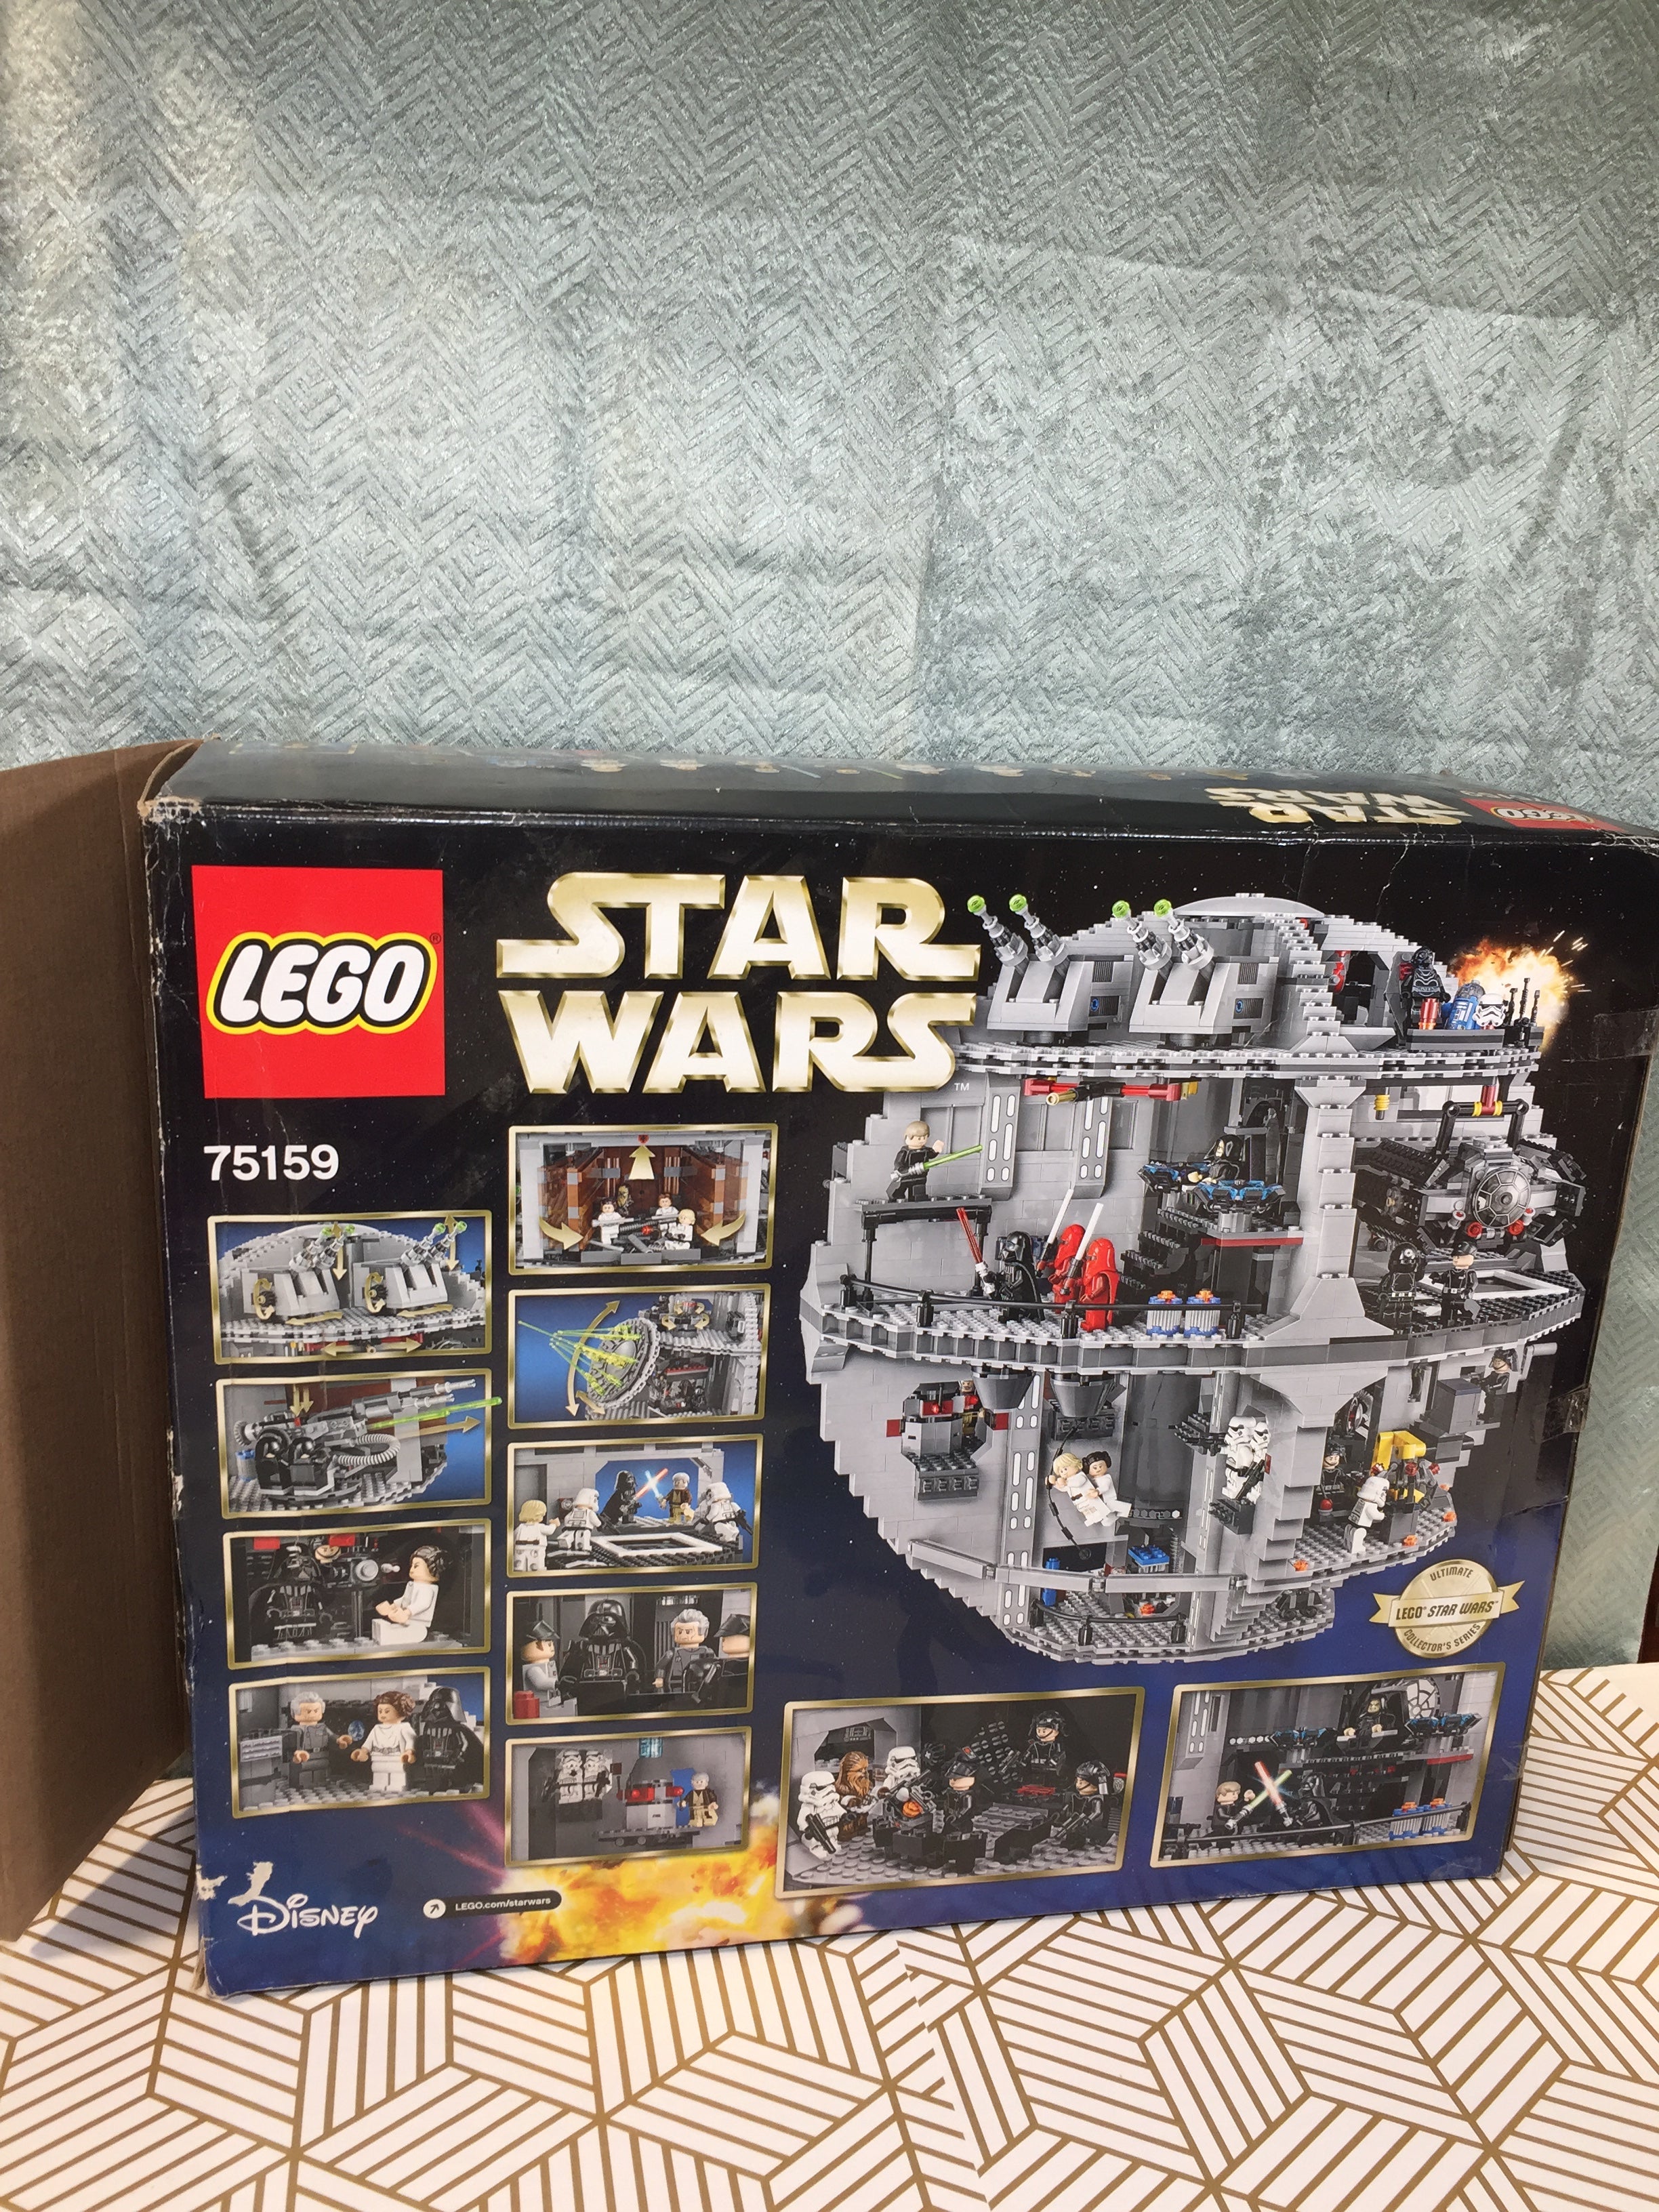 LEGO Star Wars Death Star 75159 Space Station Building Kit 4016 Pieces  Retired